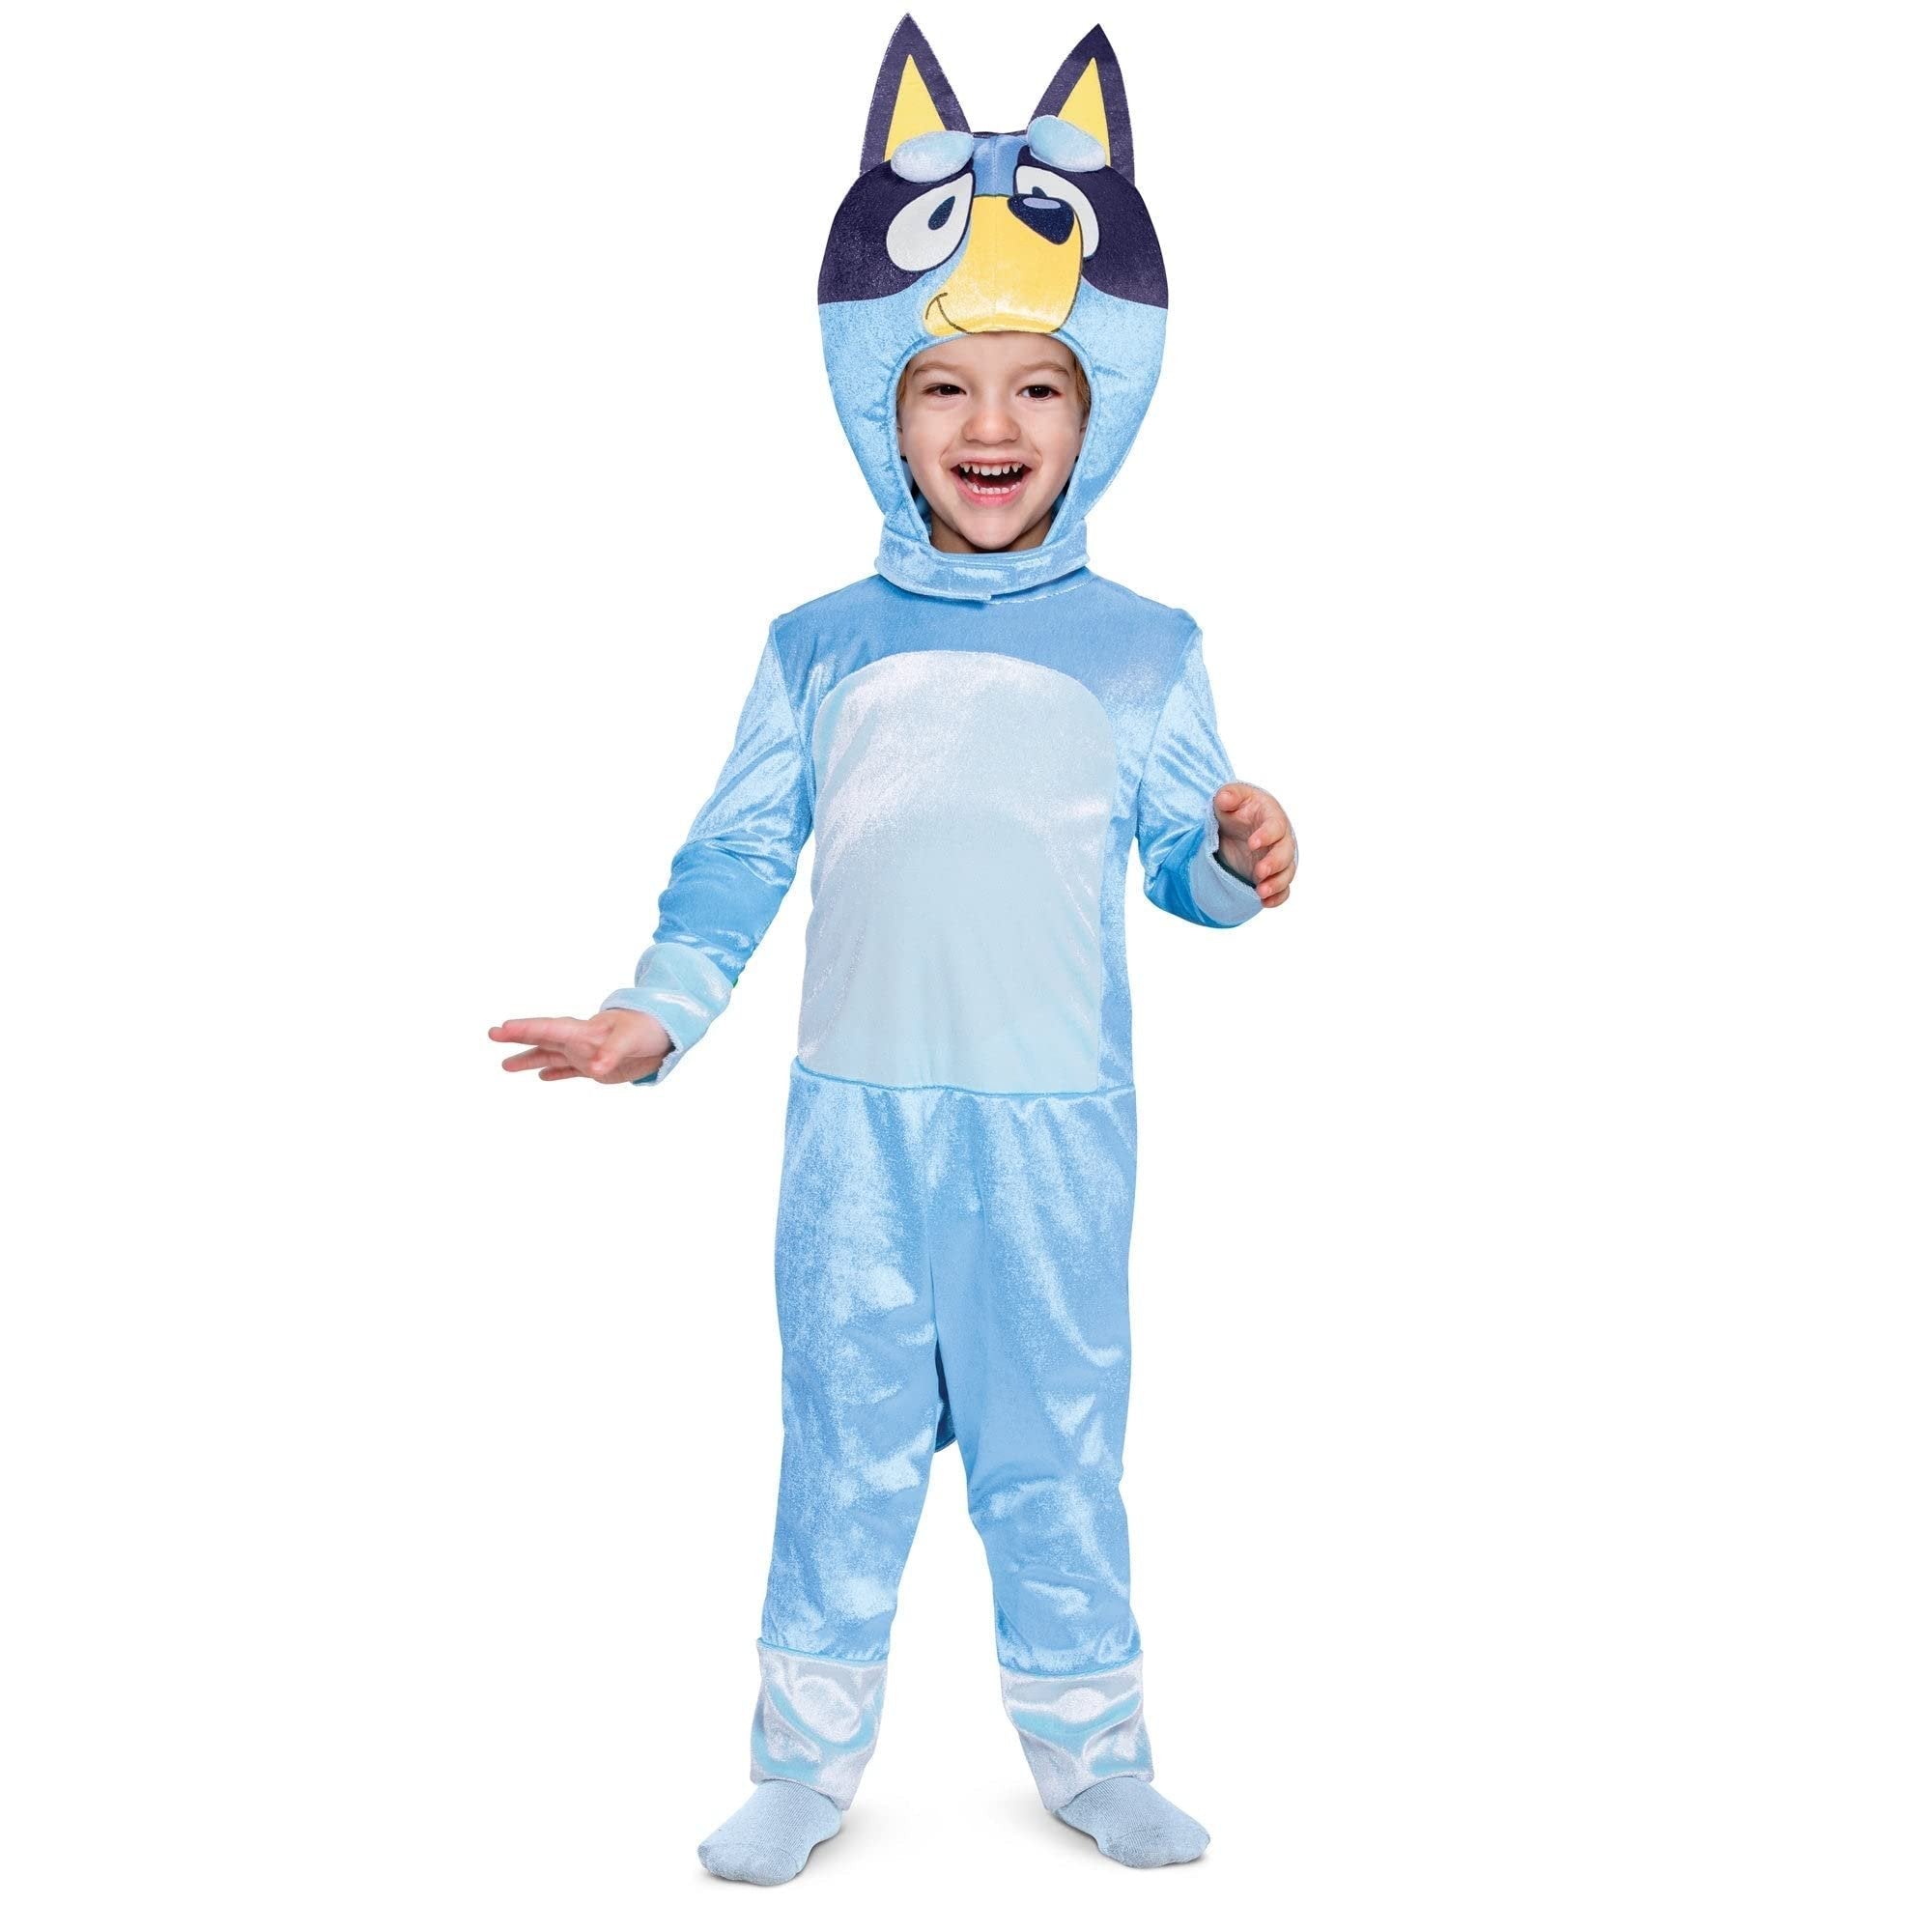 Disguise Bluey Costume for Kids, Official Bluey Character Outfit with Jumpsuit and Mask, Classic Toddler Size Medium (3T-4T)